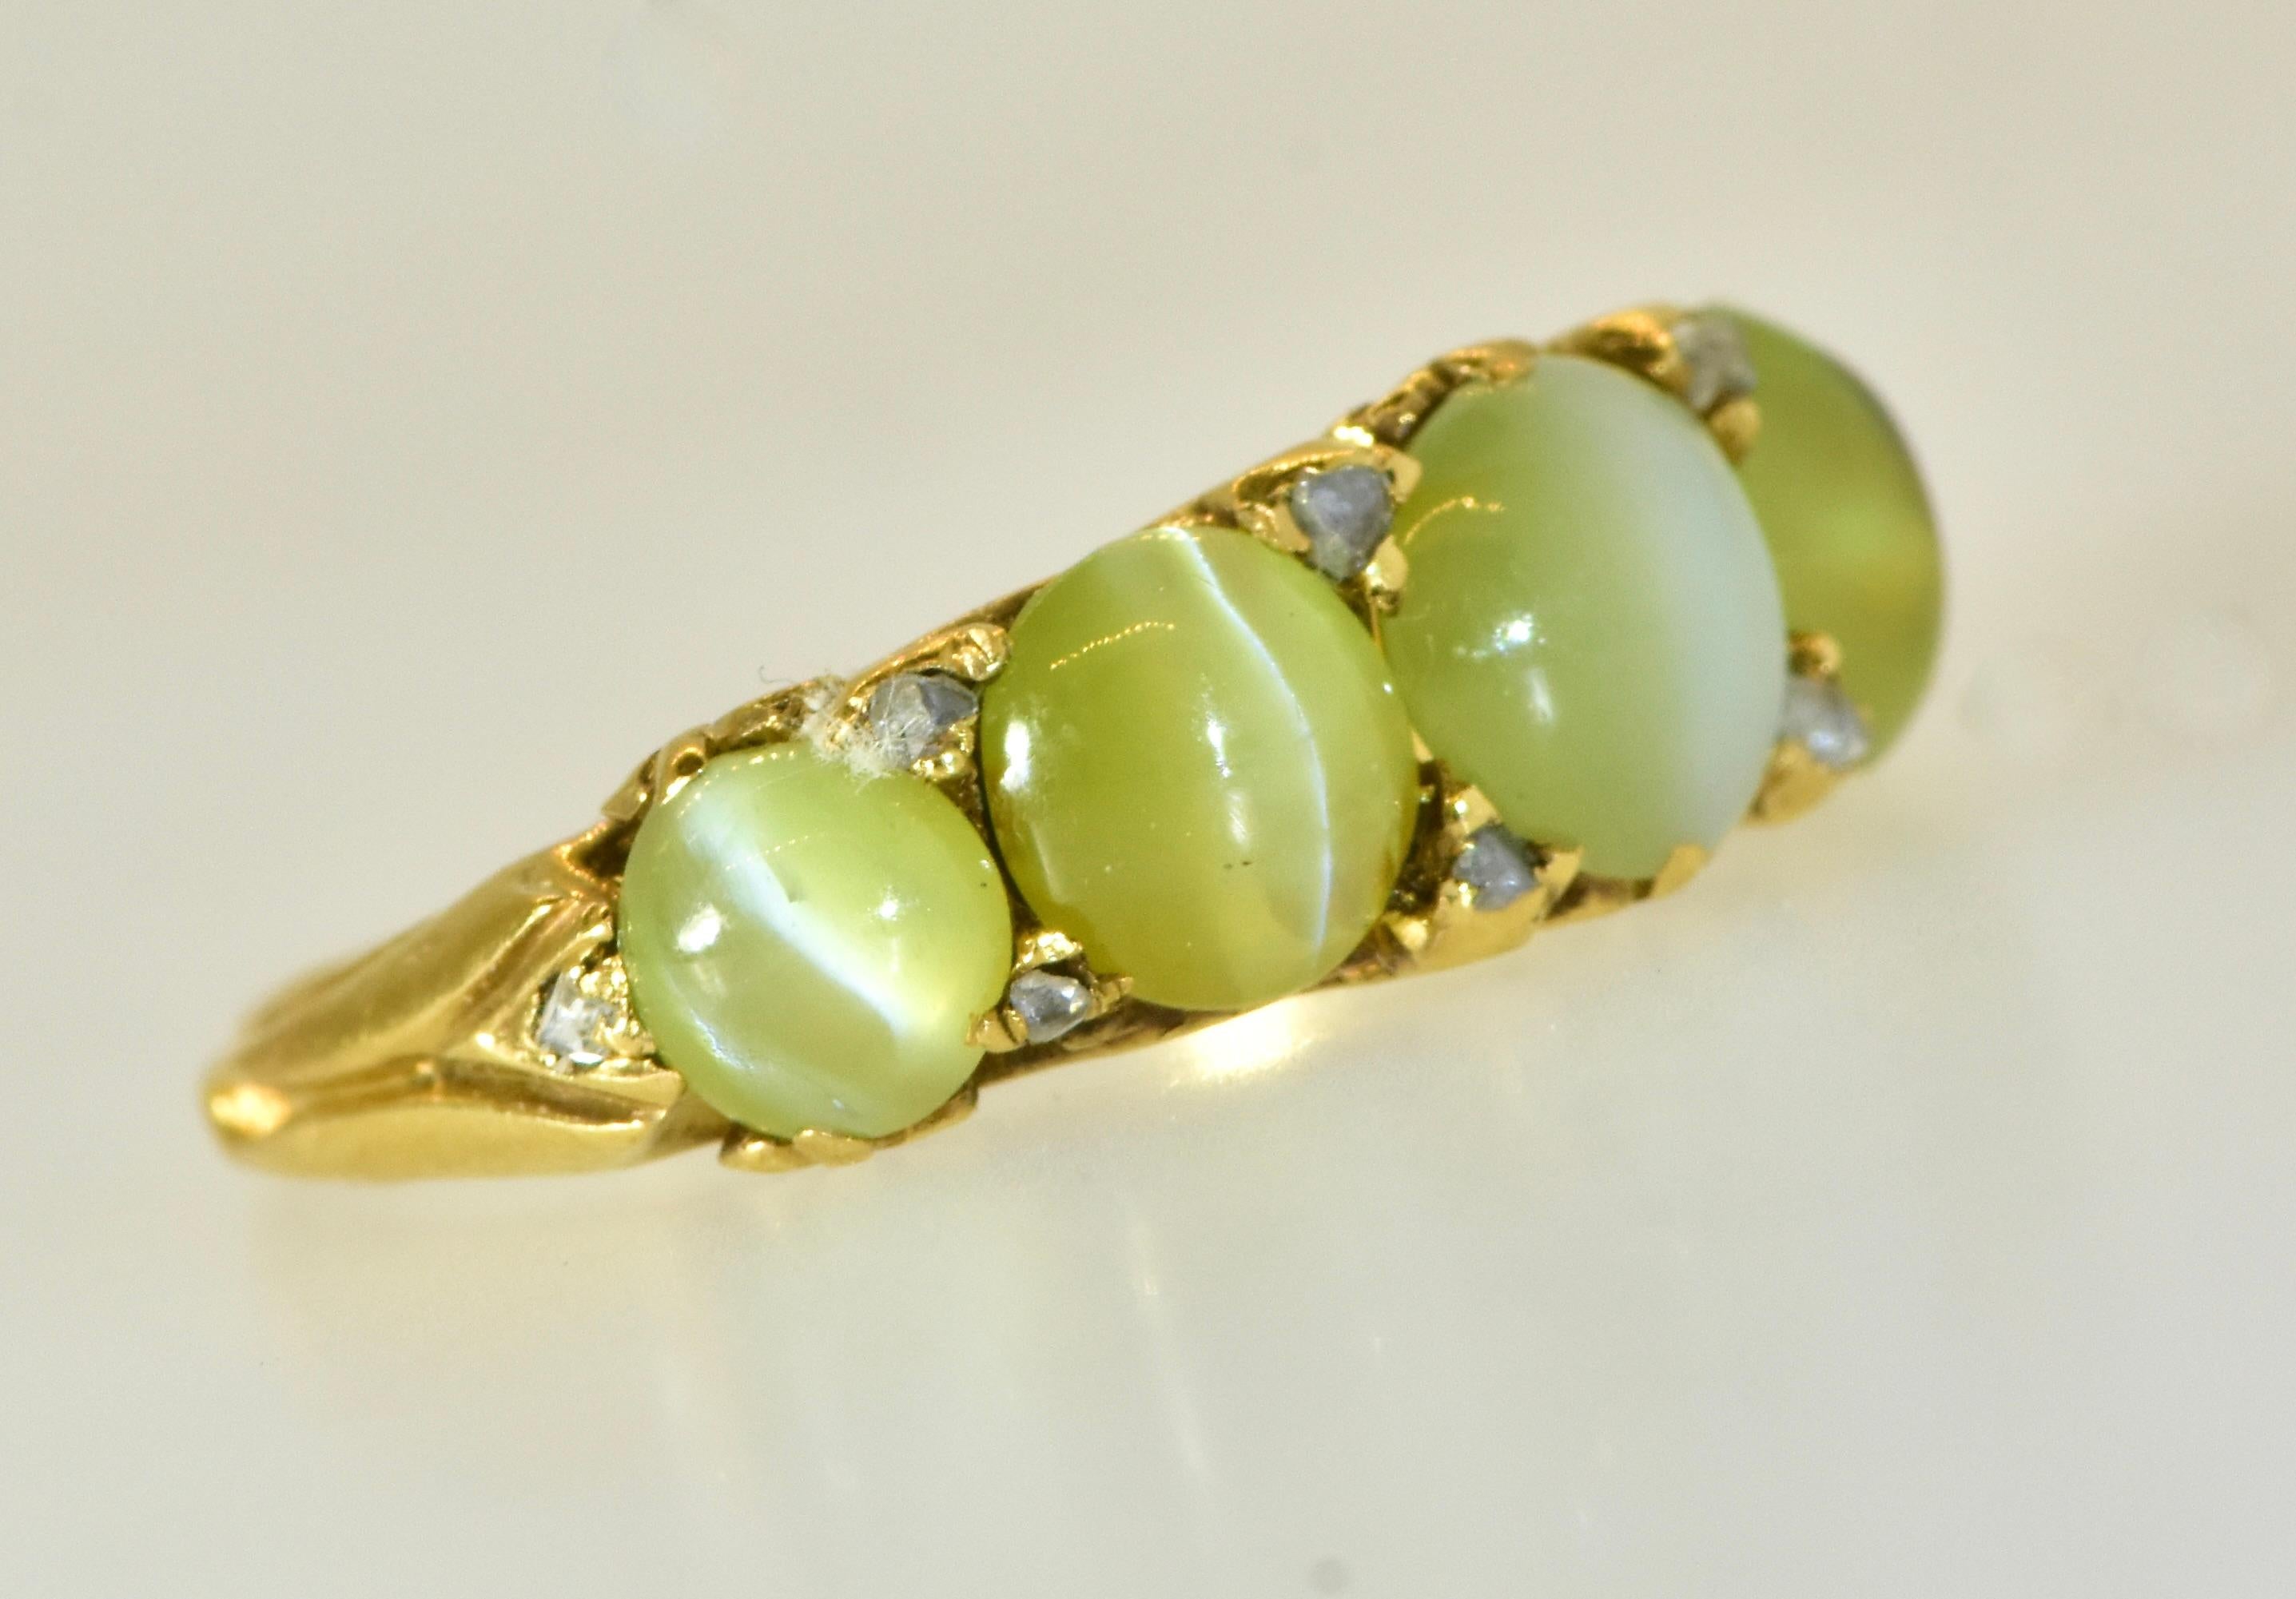 Antique ring with fine and 5 fine Cat's Eye Chrysoberyl natural stones set across the finger and interspersed with 10 small tiny rose cut diamonds as accent stones.  The estimated weight by our internal gemologist is 2.7 cts.  These very unusual